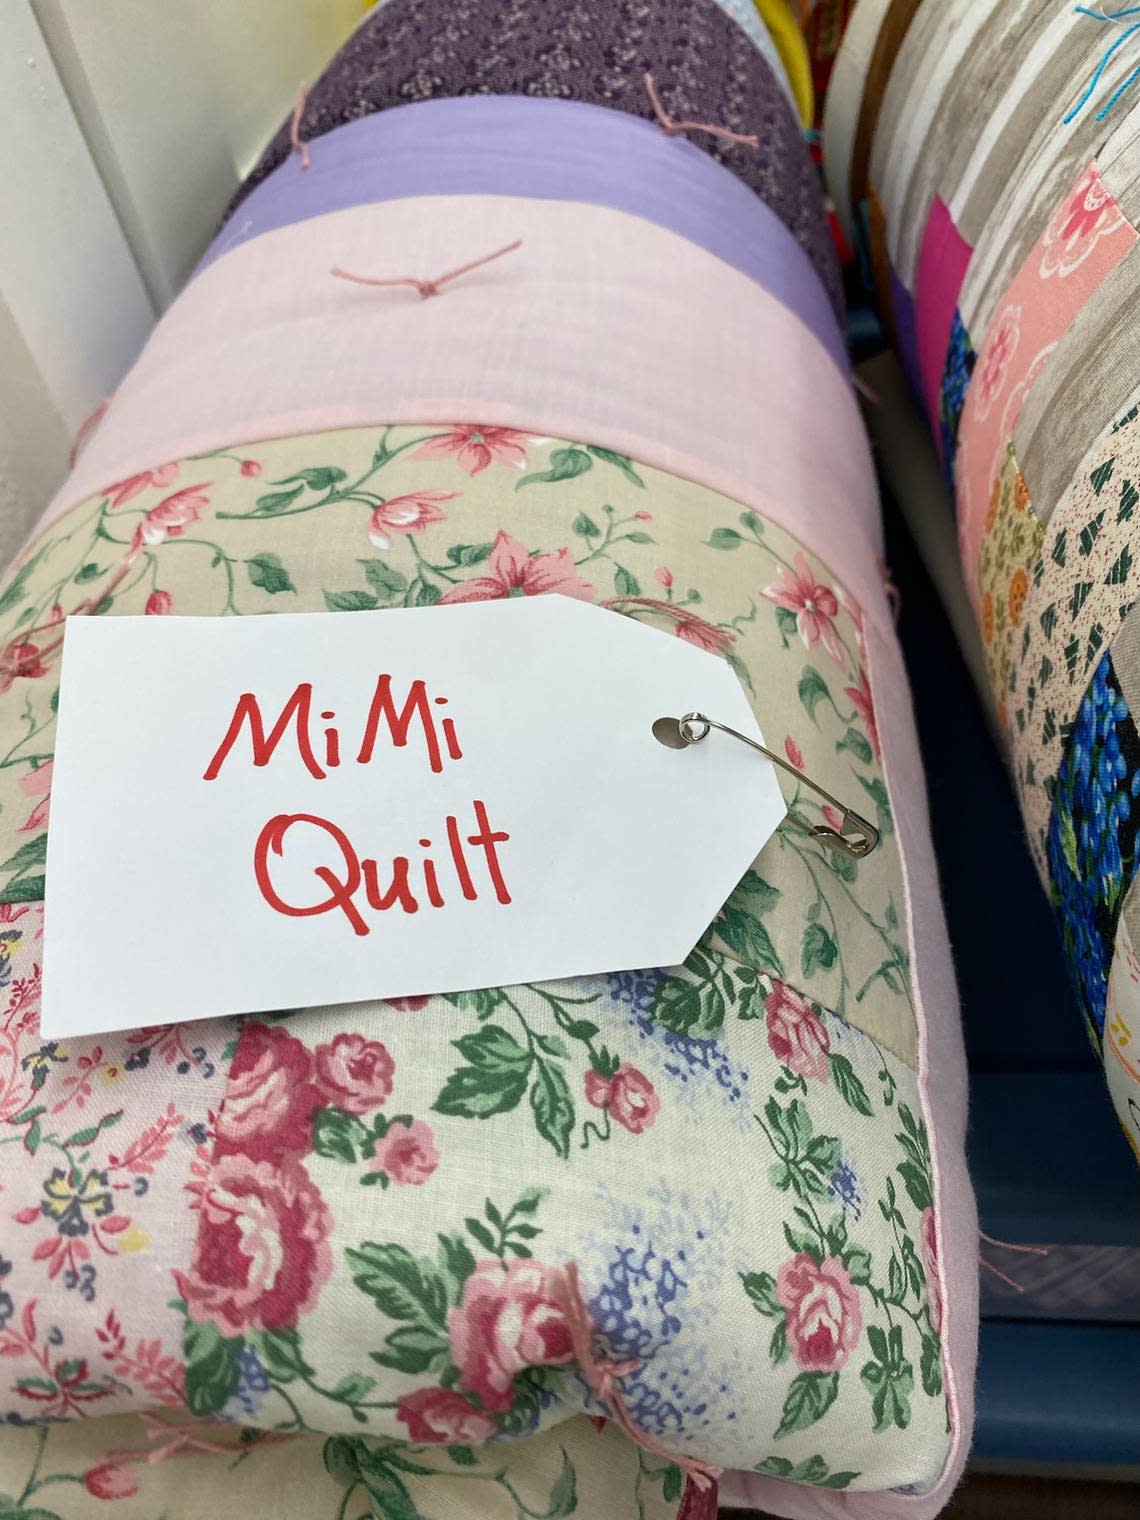 The Hills Quilting Ladies would attached a “Mimi quilt” tag to the quilts they completed with Verna Mae Brashear’s leftover fabric.